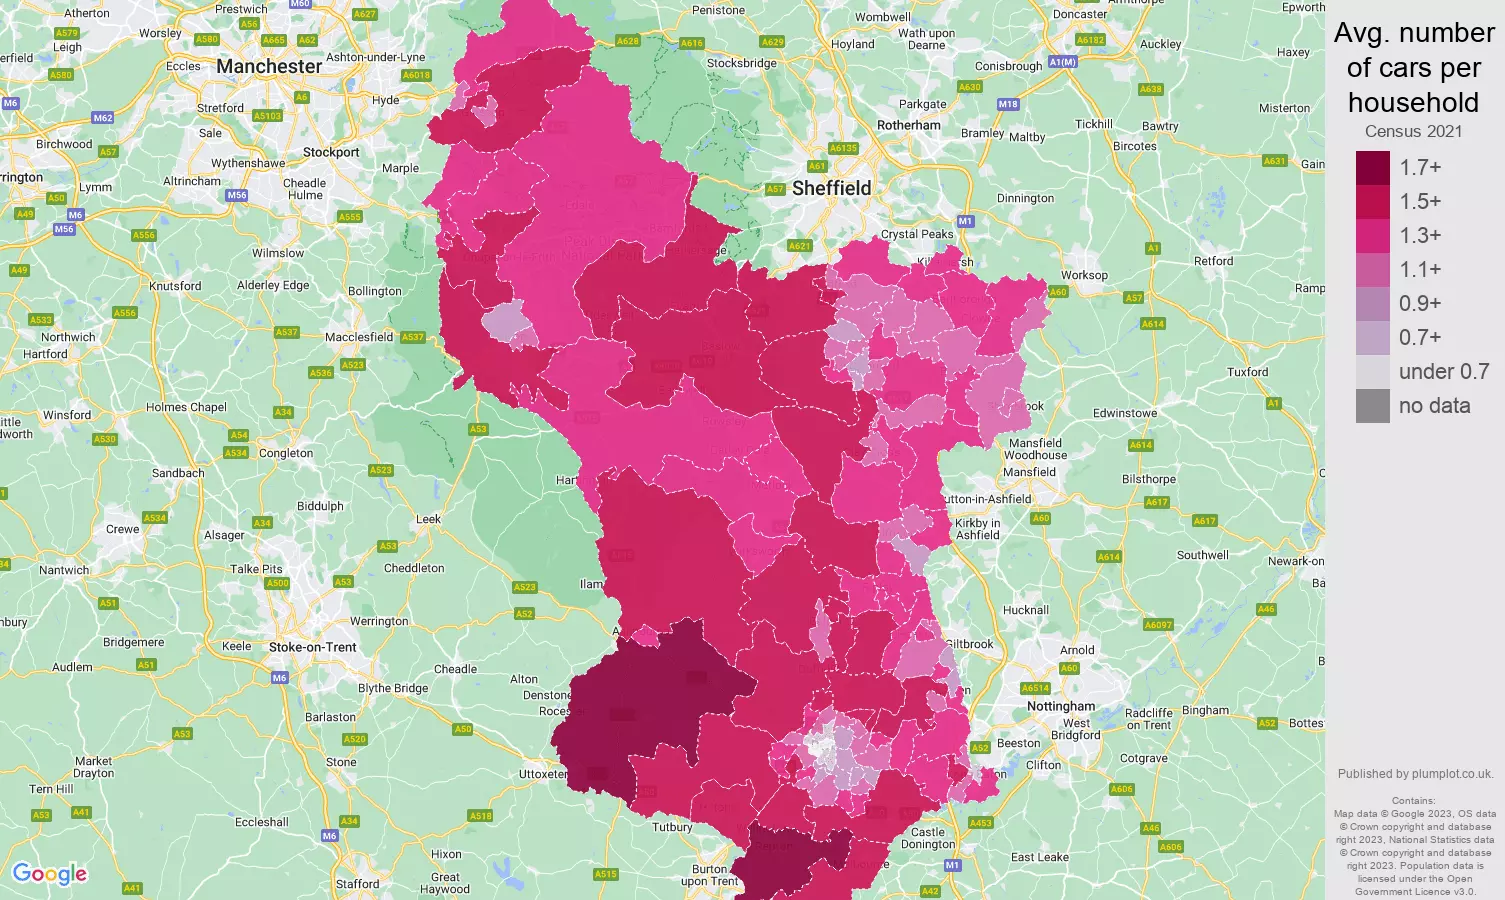 Derbyshire cars per household map